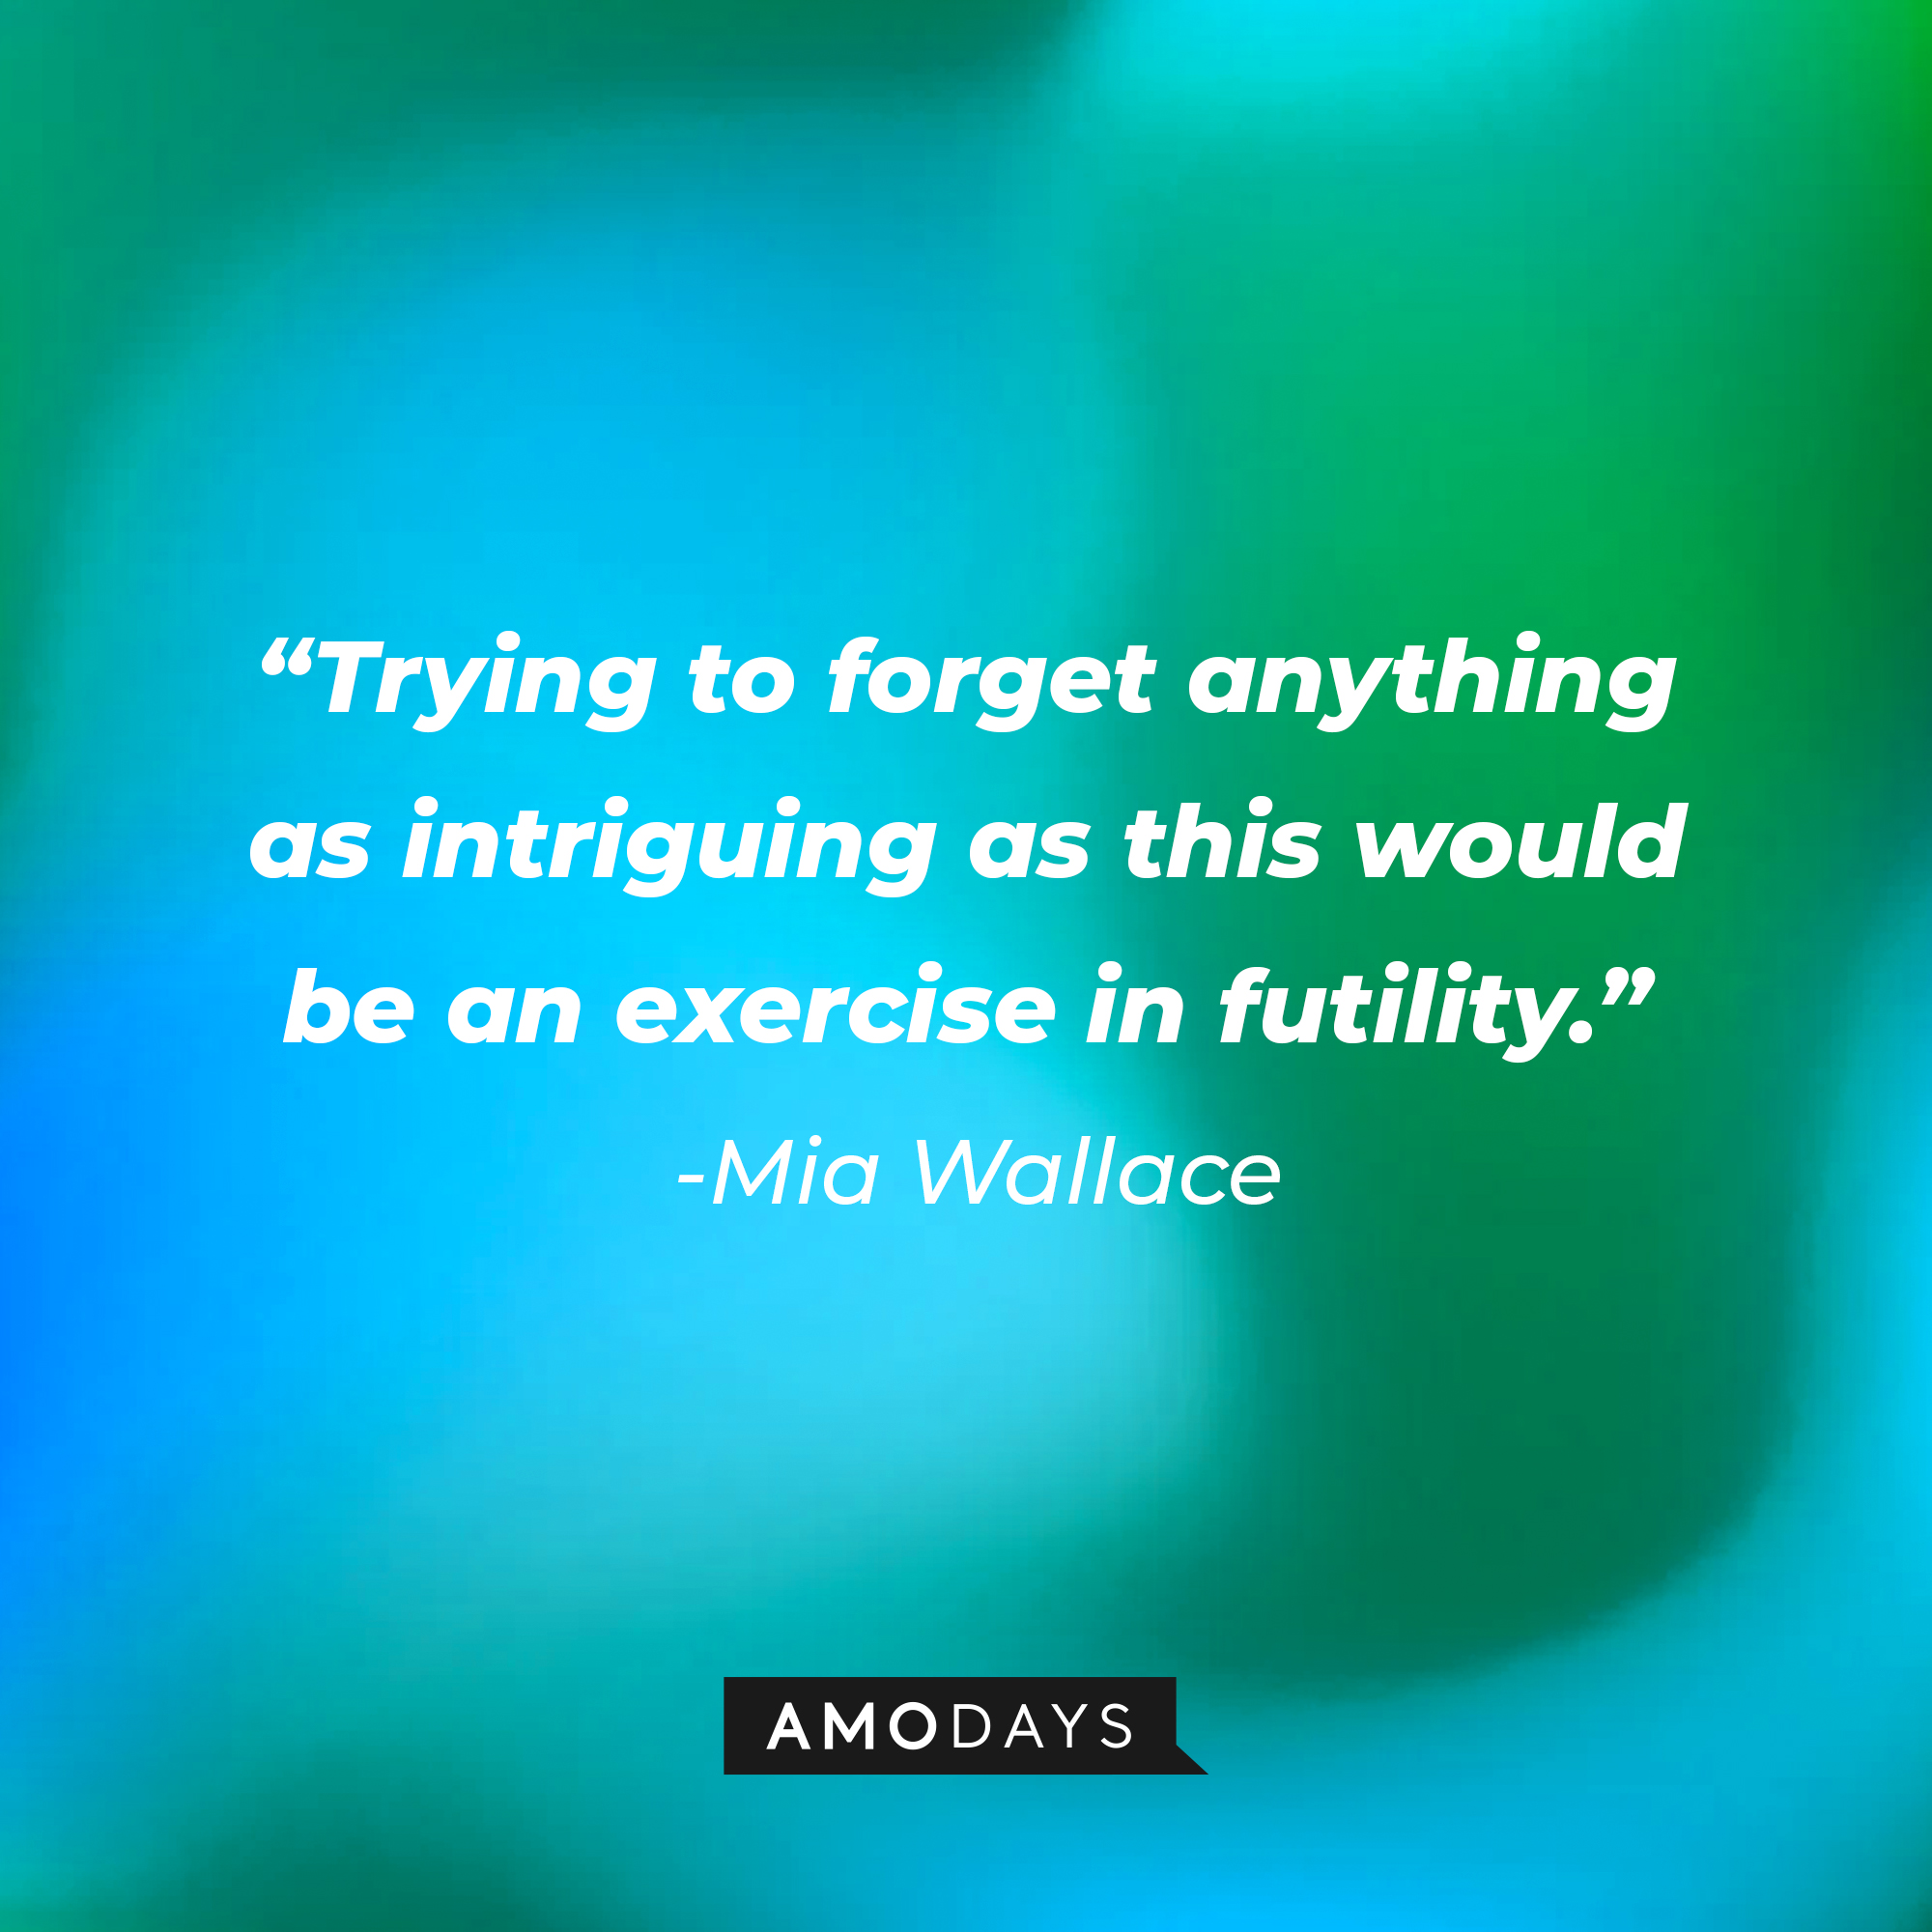 Mia Wallace’s quote: “Trying to forget anything as intriguing as this would be an exercise in futility.” | Source: AmoDays